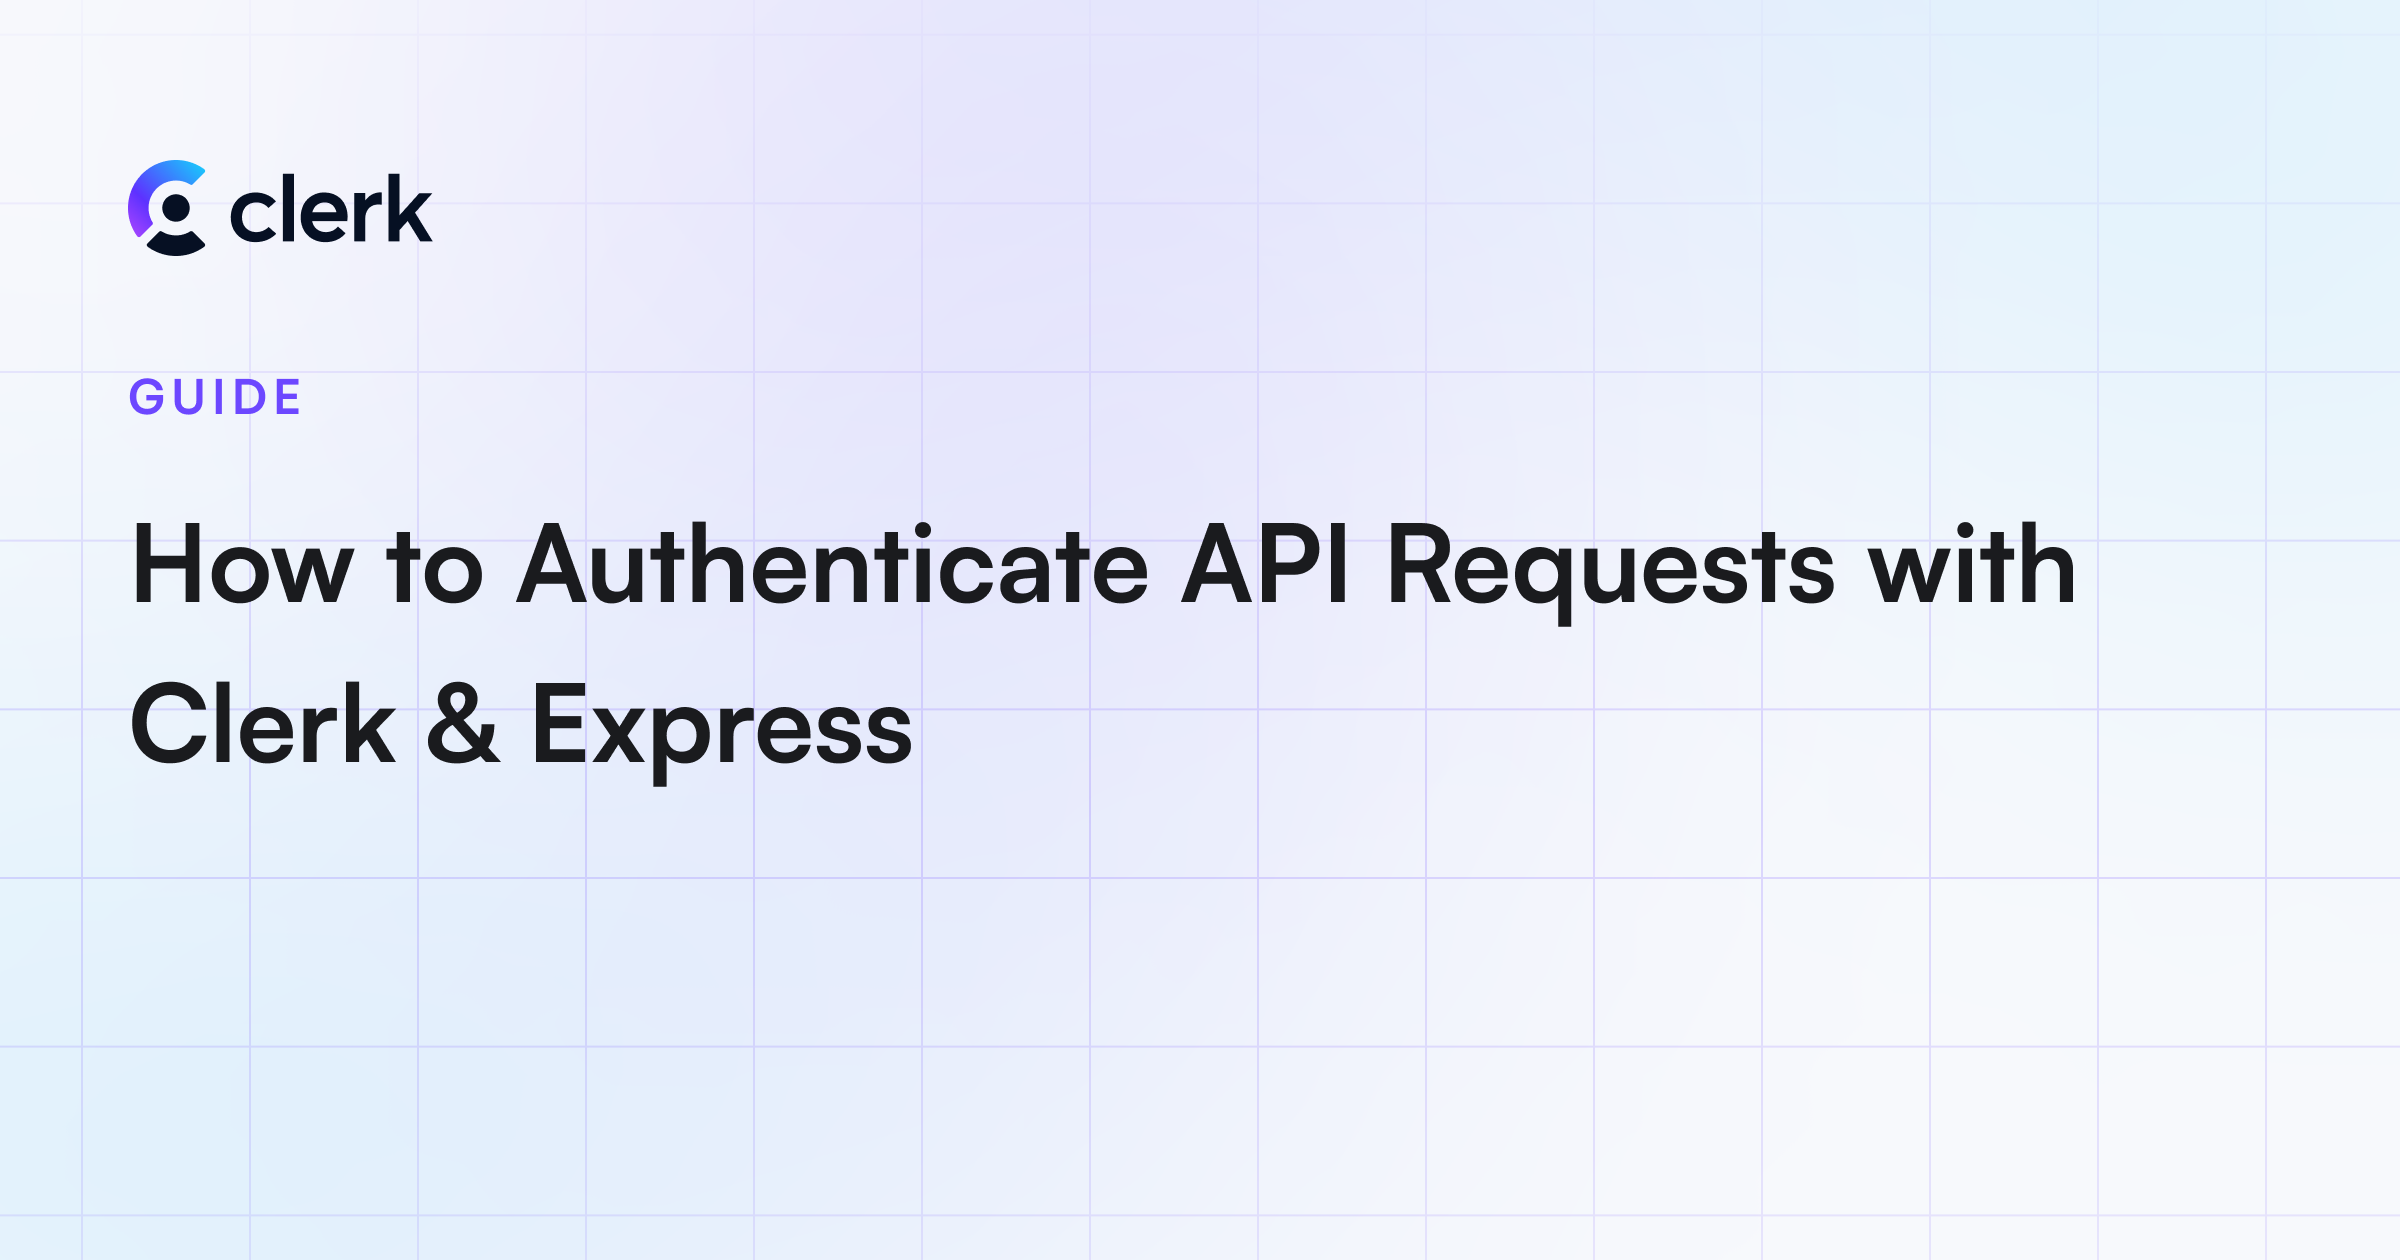 How to Authenticate API Requests with Clerk & Express